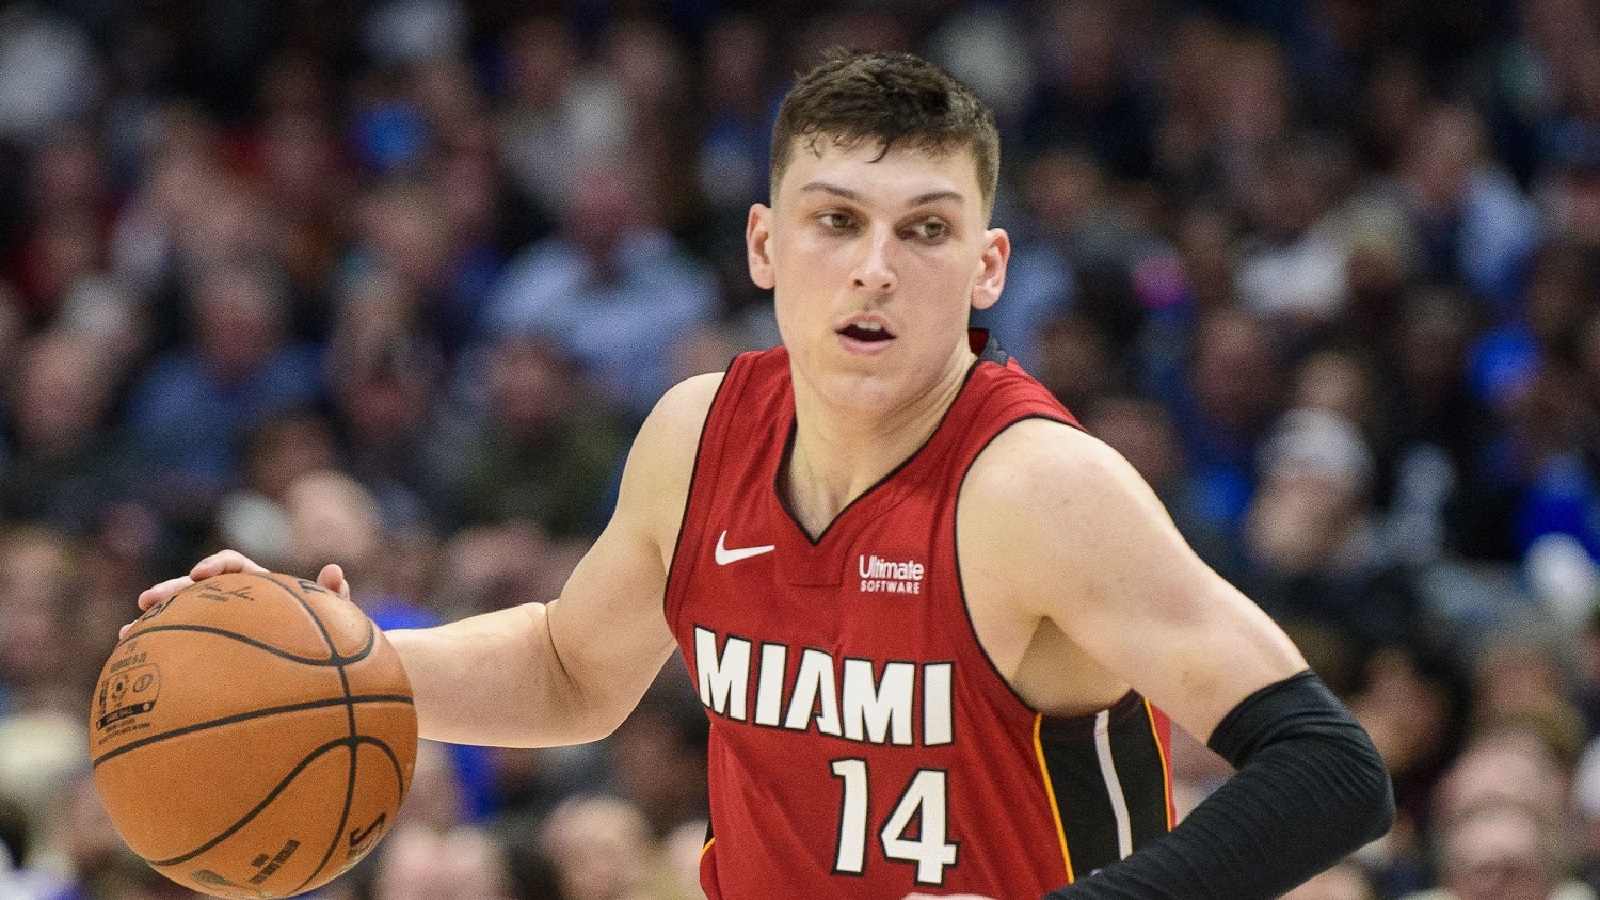 In a city known for swag, the Heat may have found `Swaggy T' in Tyler Herro  - The Athletic